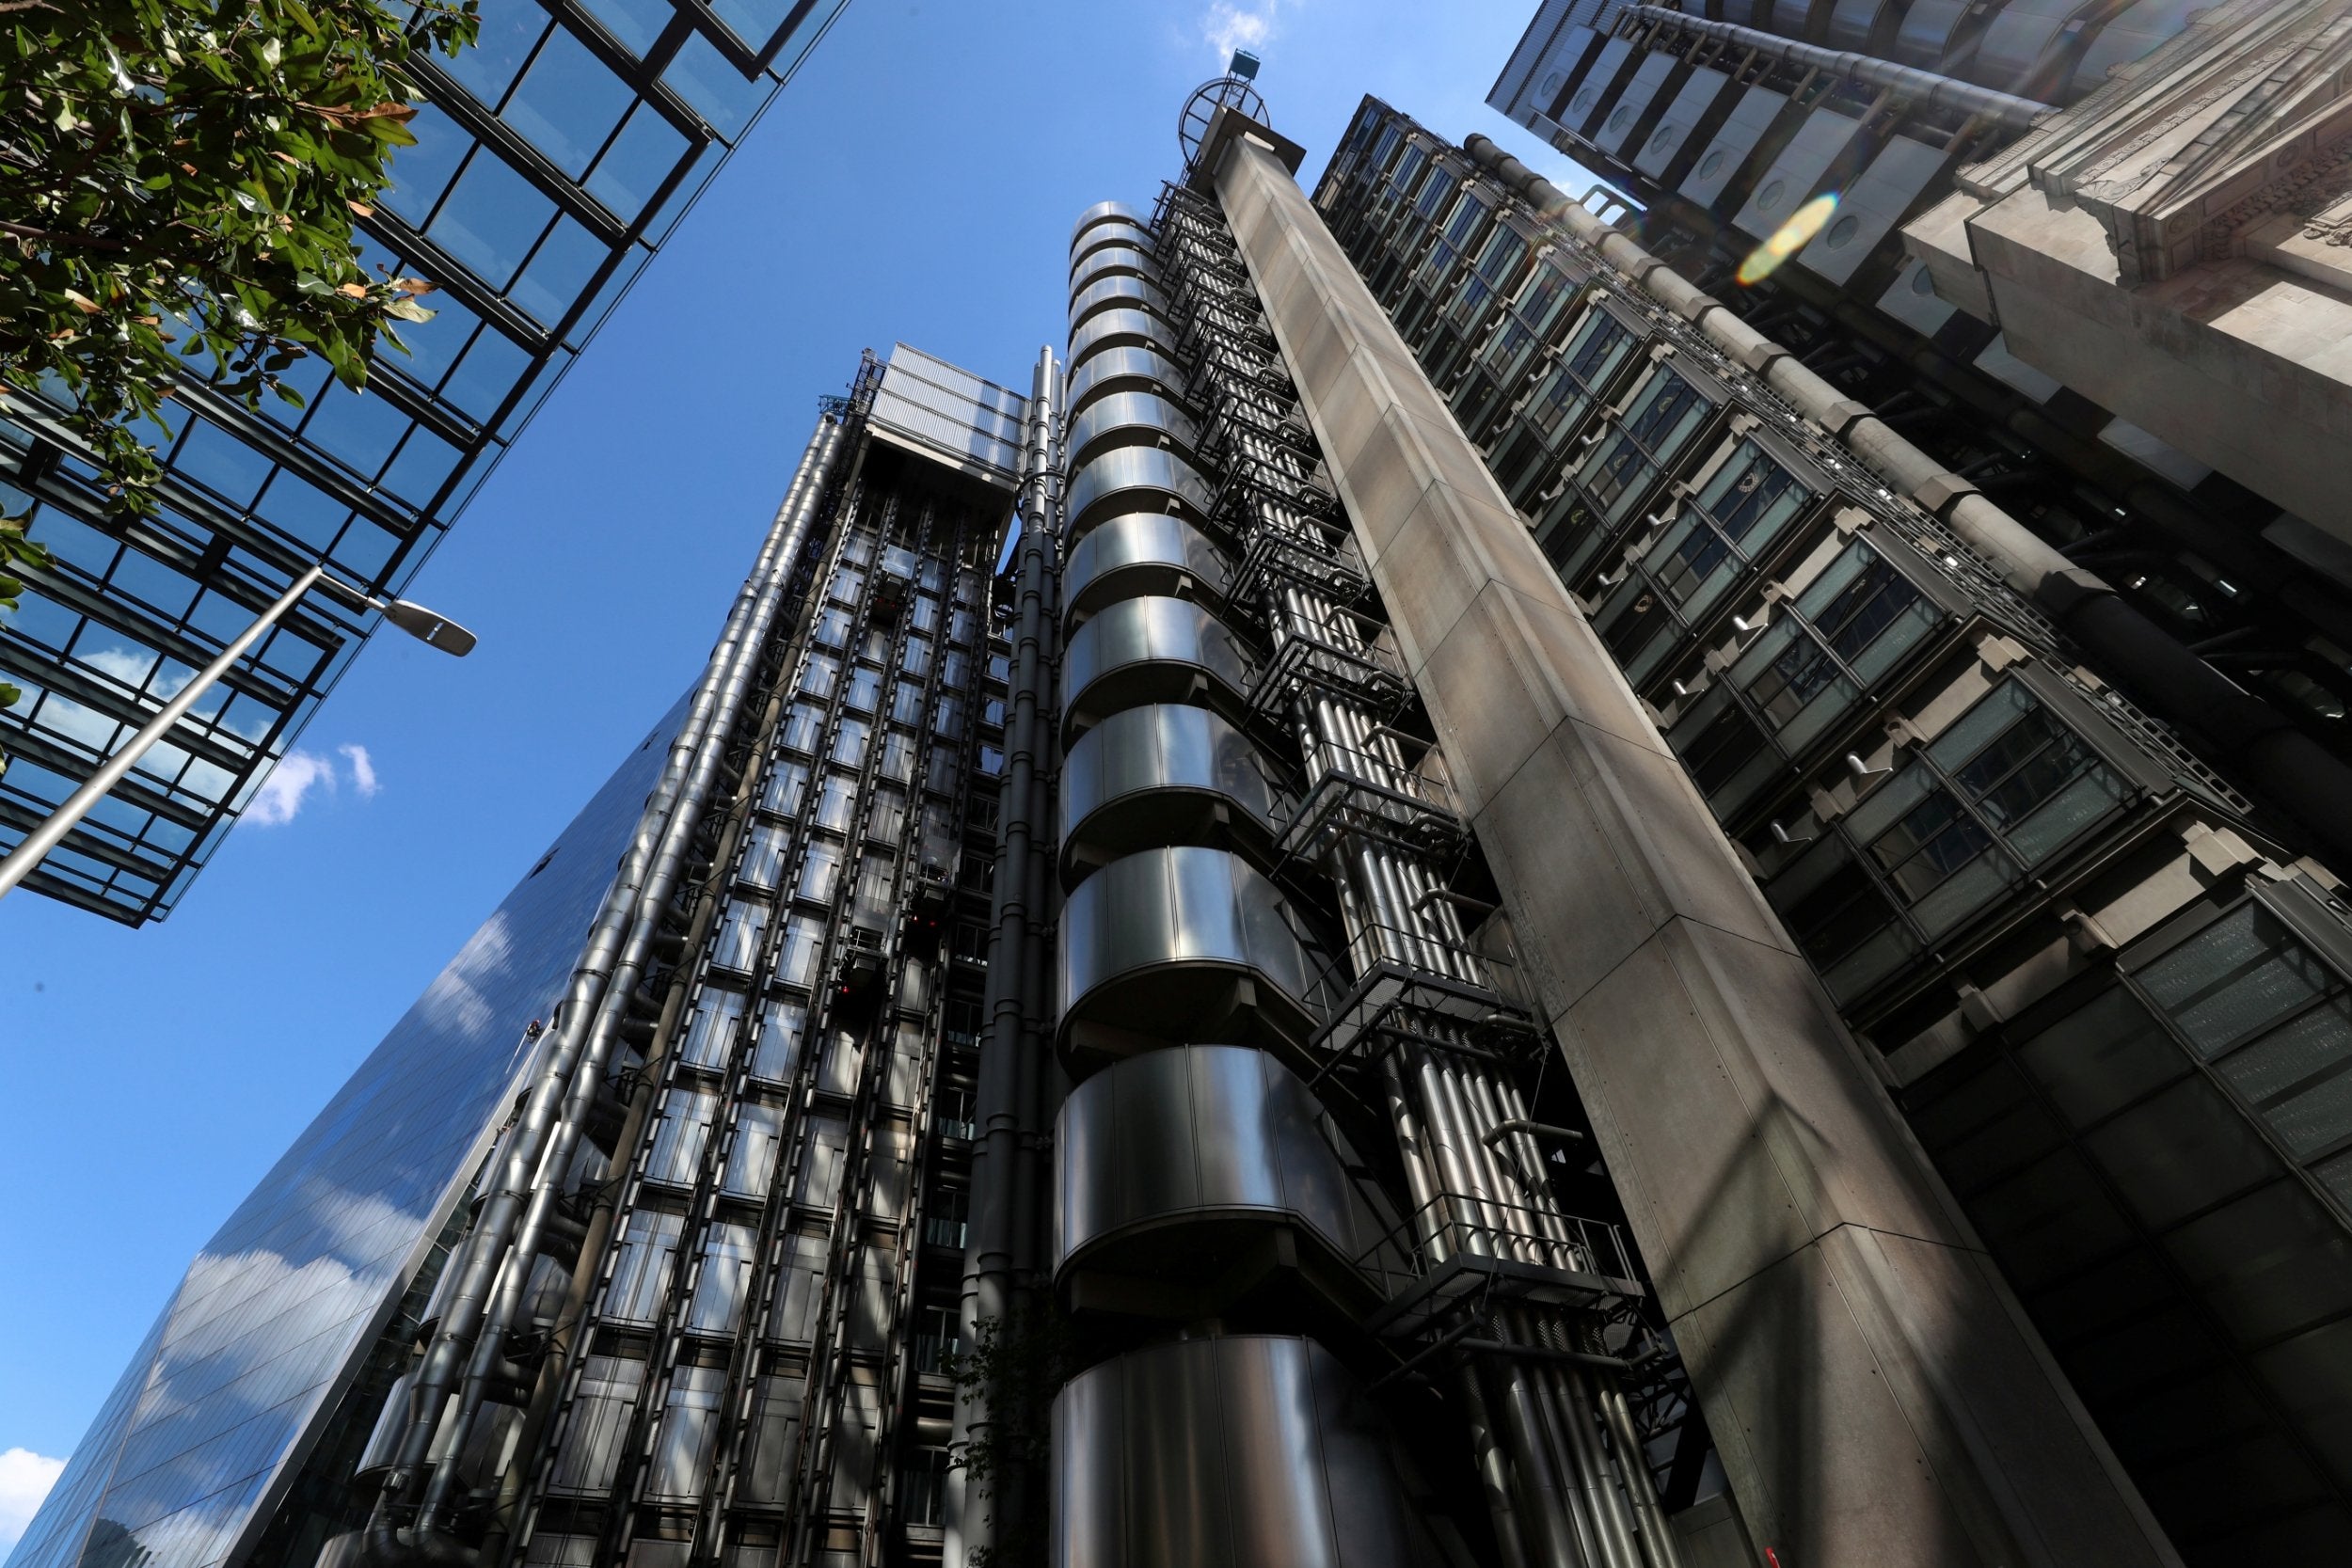 A diverse market? Lloyd’s of London has deep-seated cultural problems